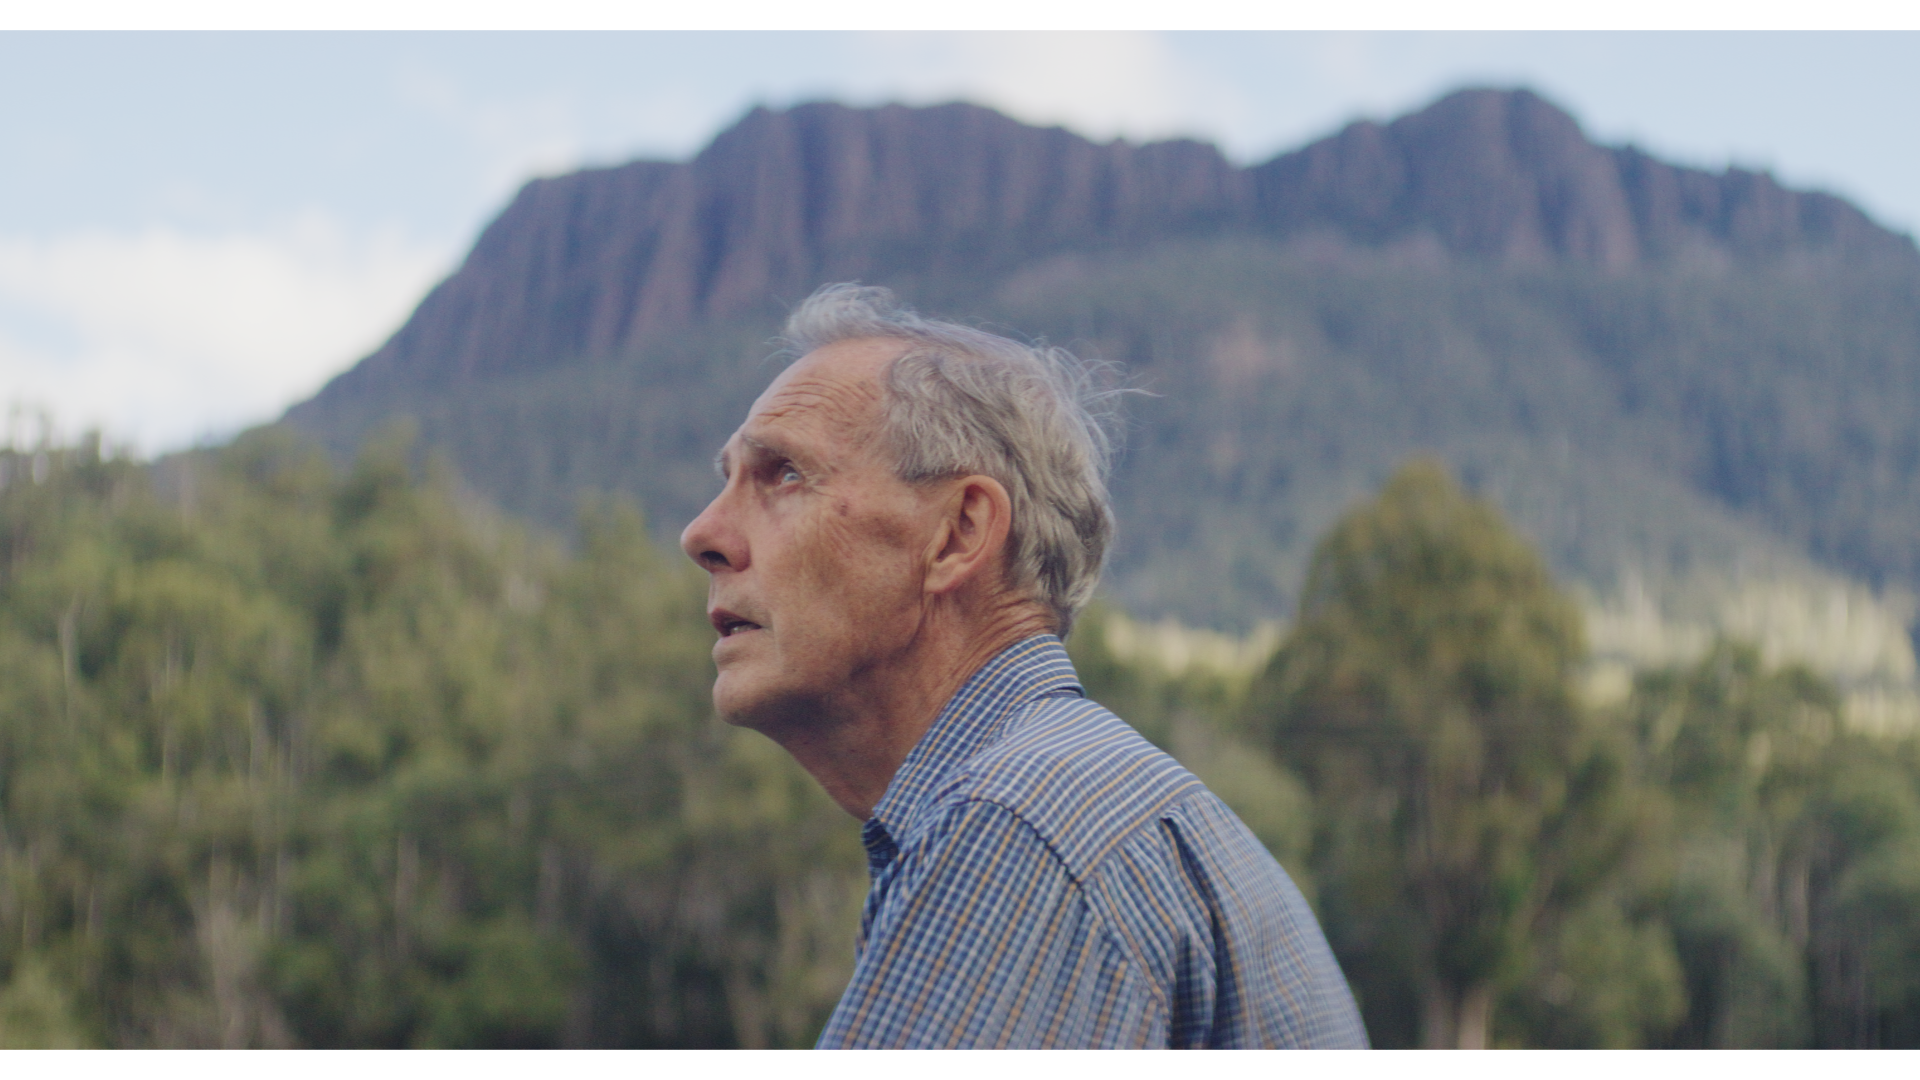 “The planet needs our creativity, not just our anger”: Bob Brown wants you to get active, get political and get outdoors